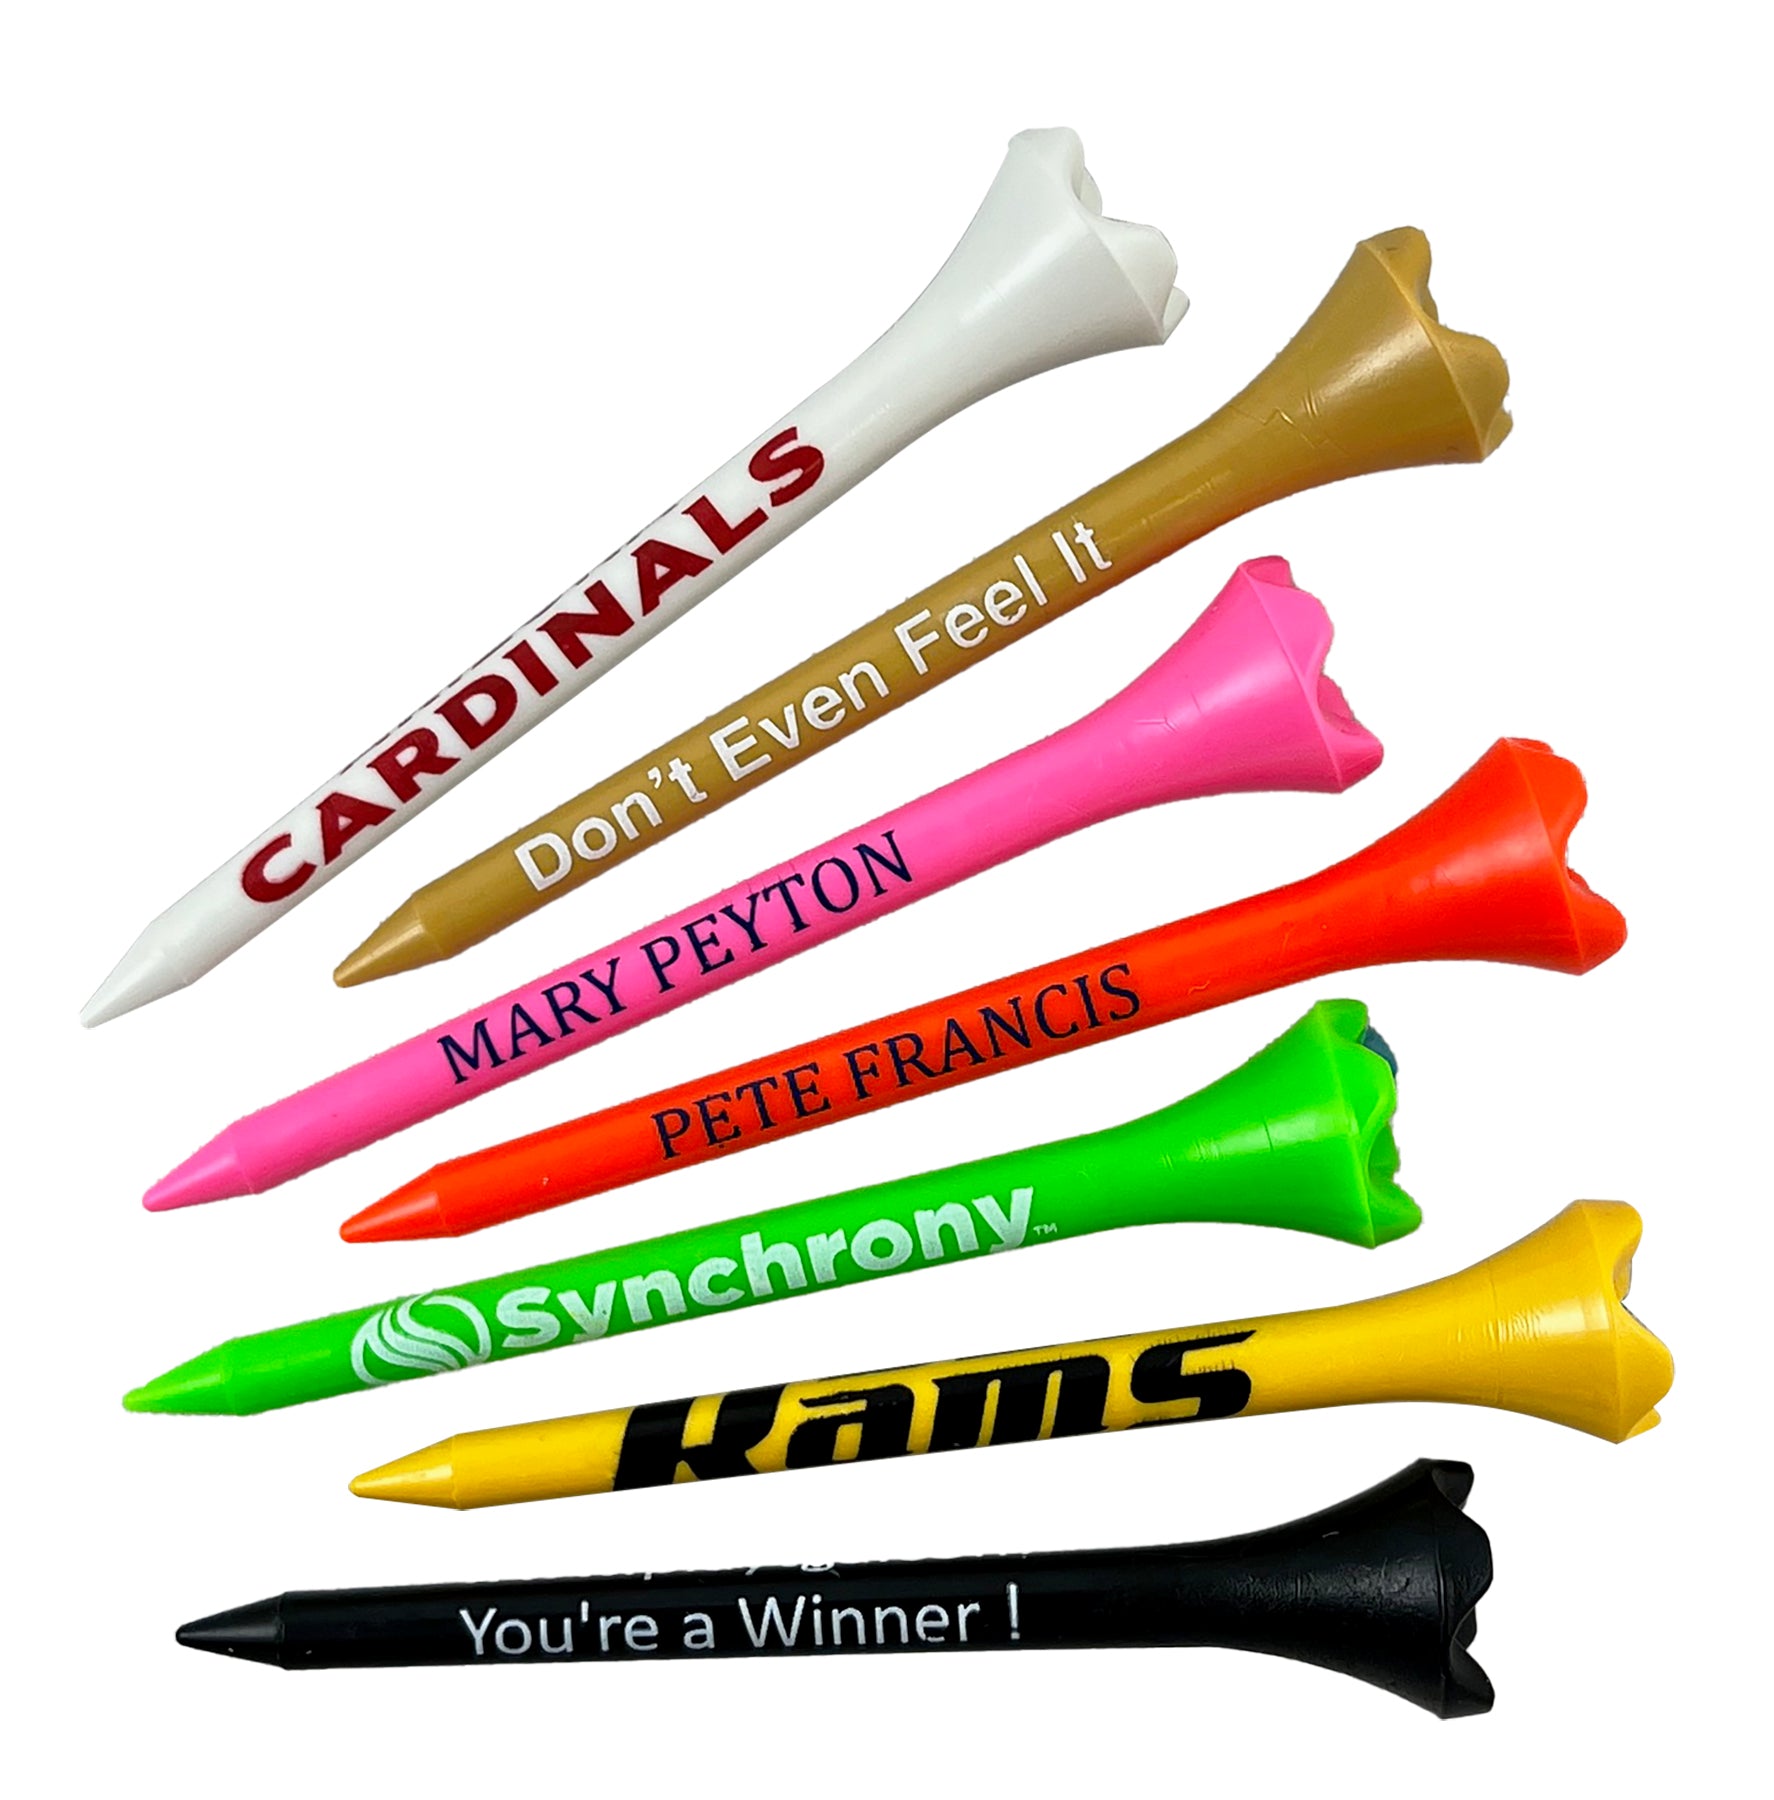 All Personalized Golf Tees